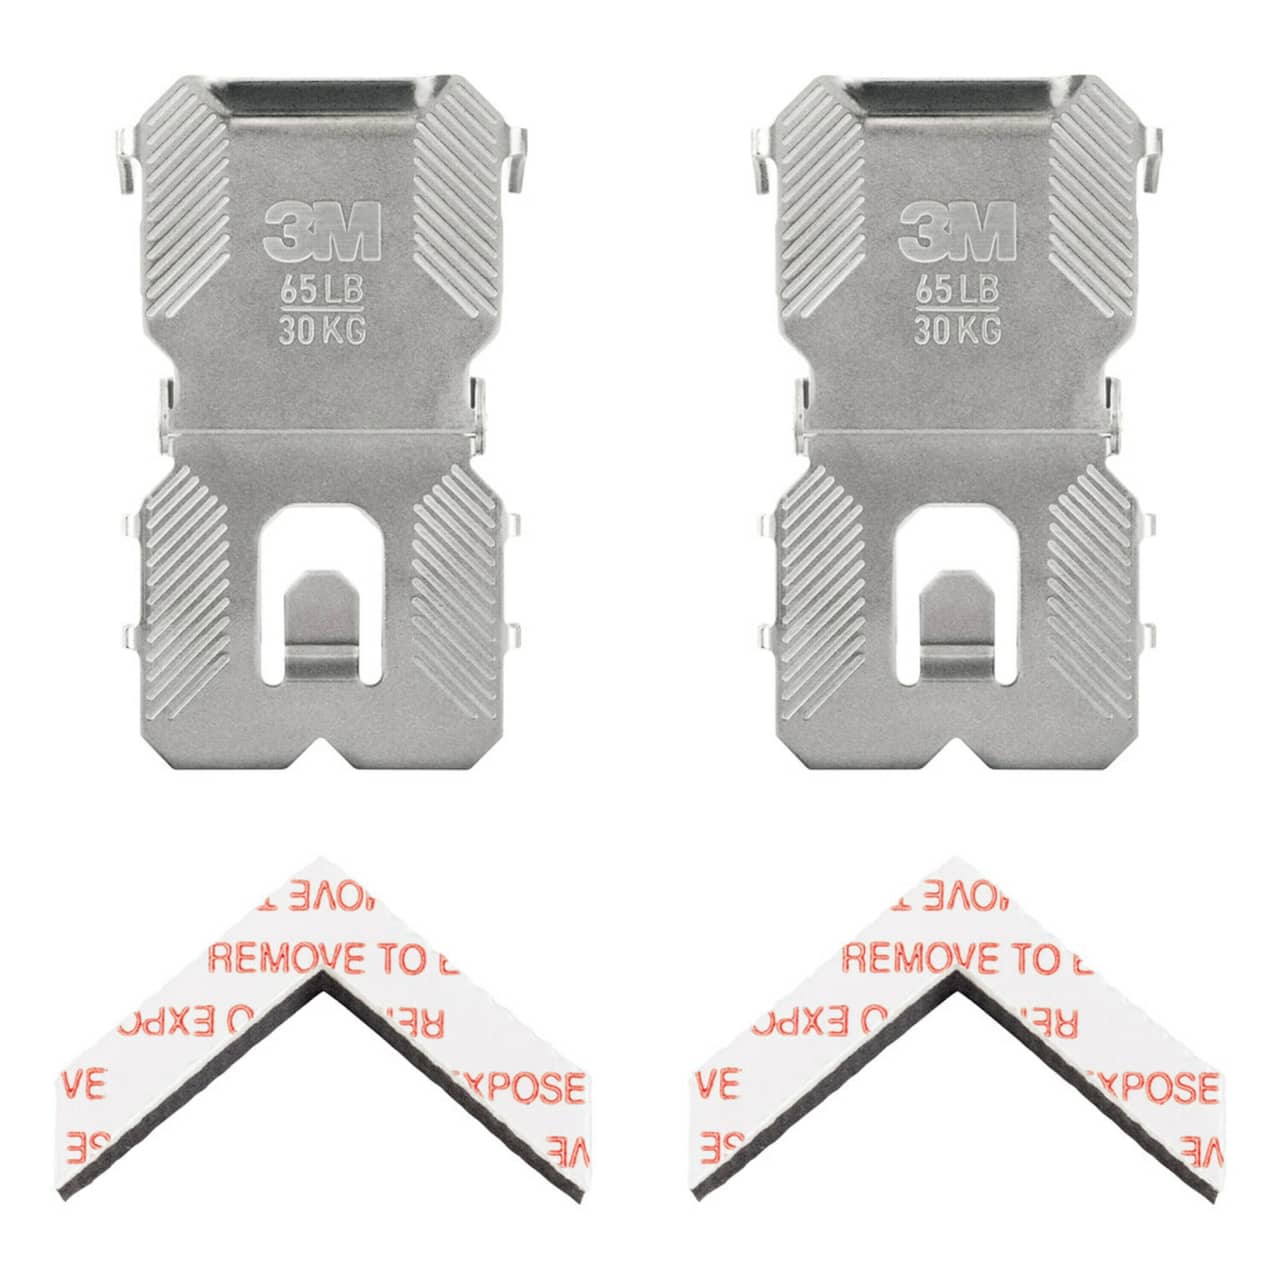 3M CLAW™ 65lb. Drywall Picture Hangers